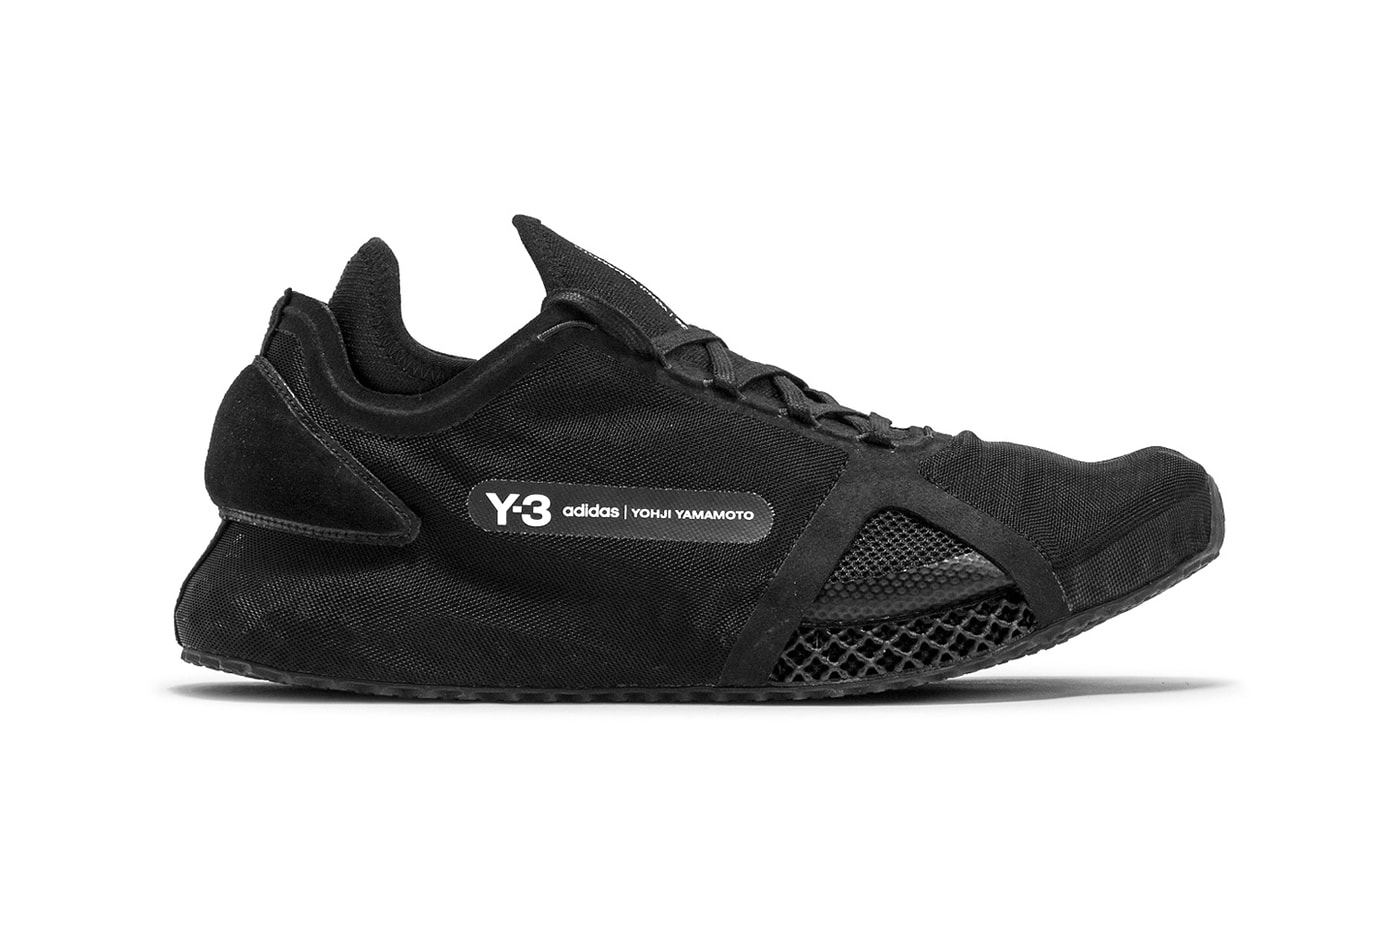 y 3 runner 4d io black menswear streetwear spring summer 2021 ss21 collection shoes trainers runners release